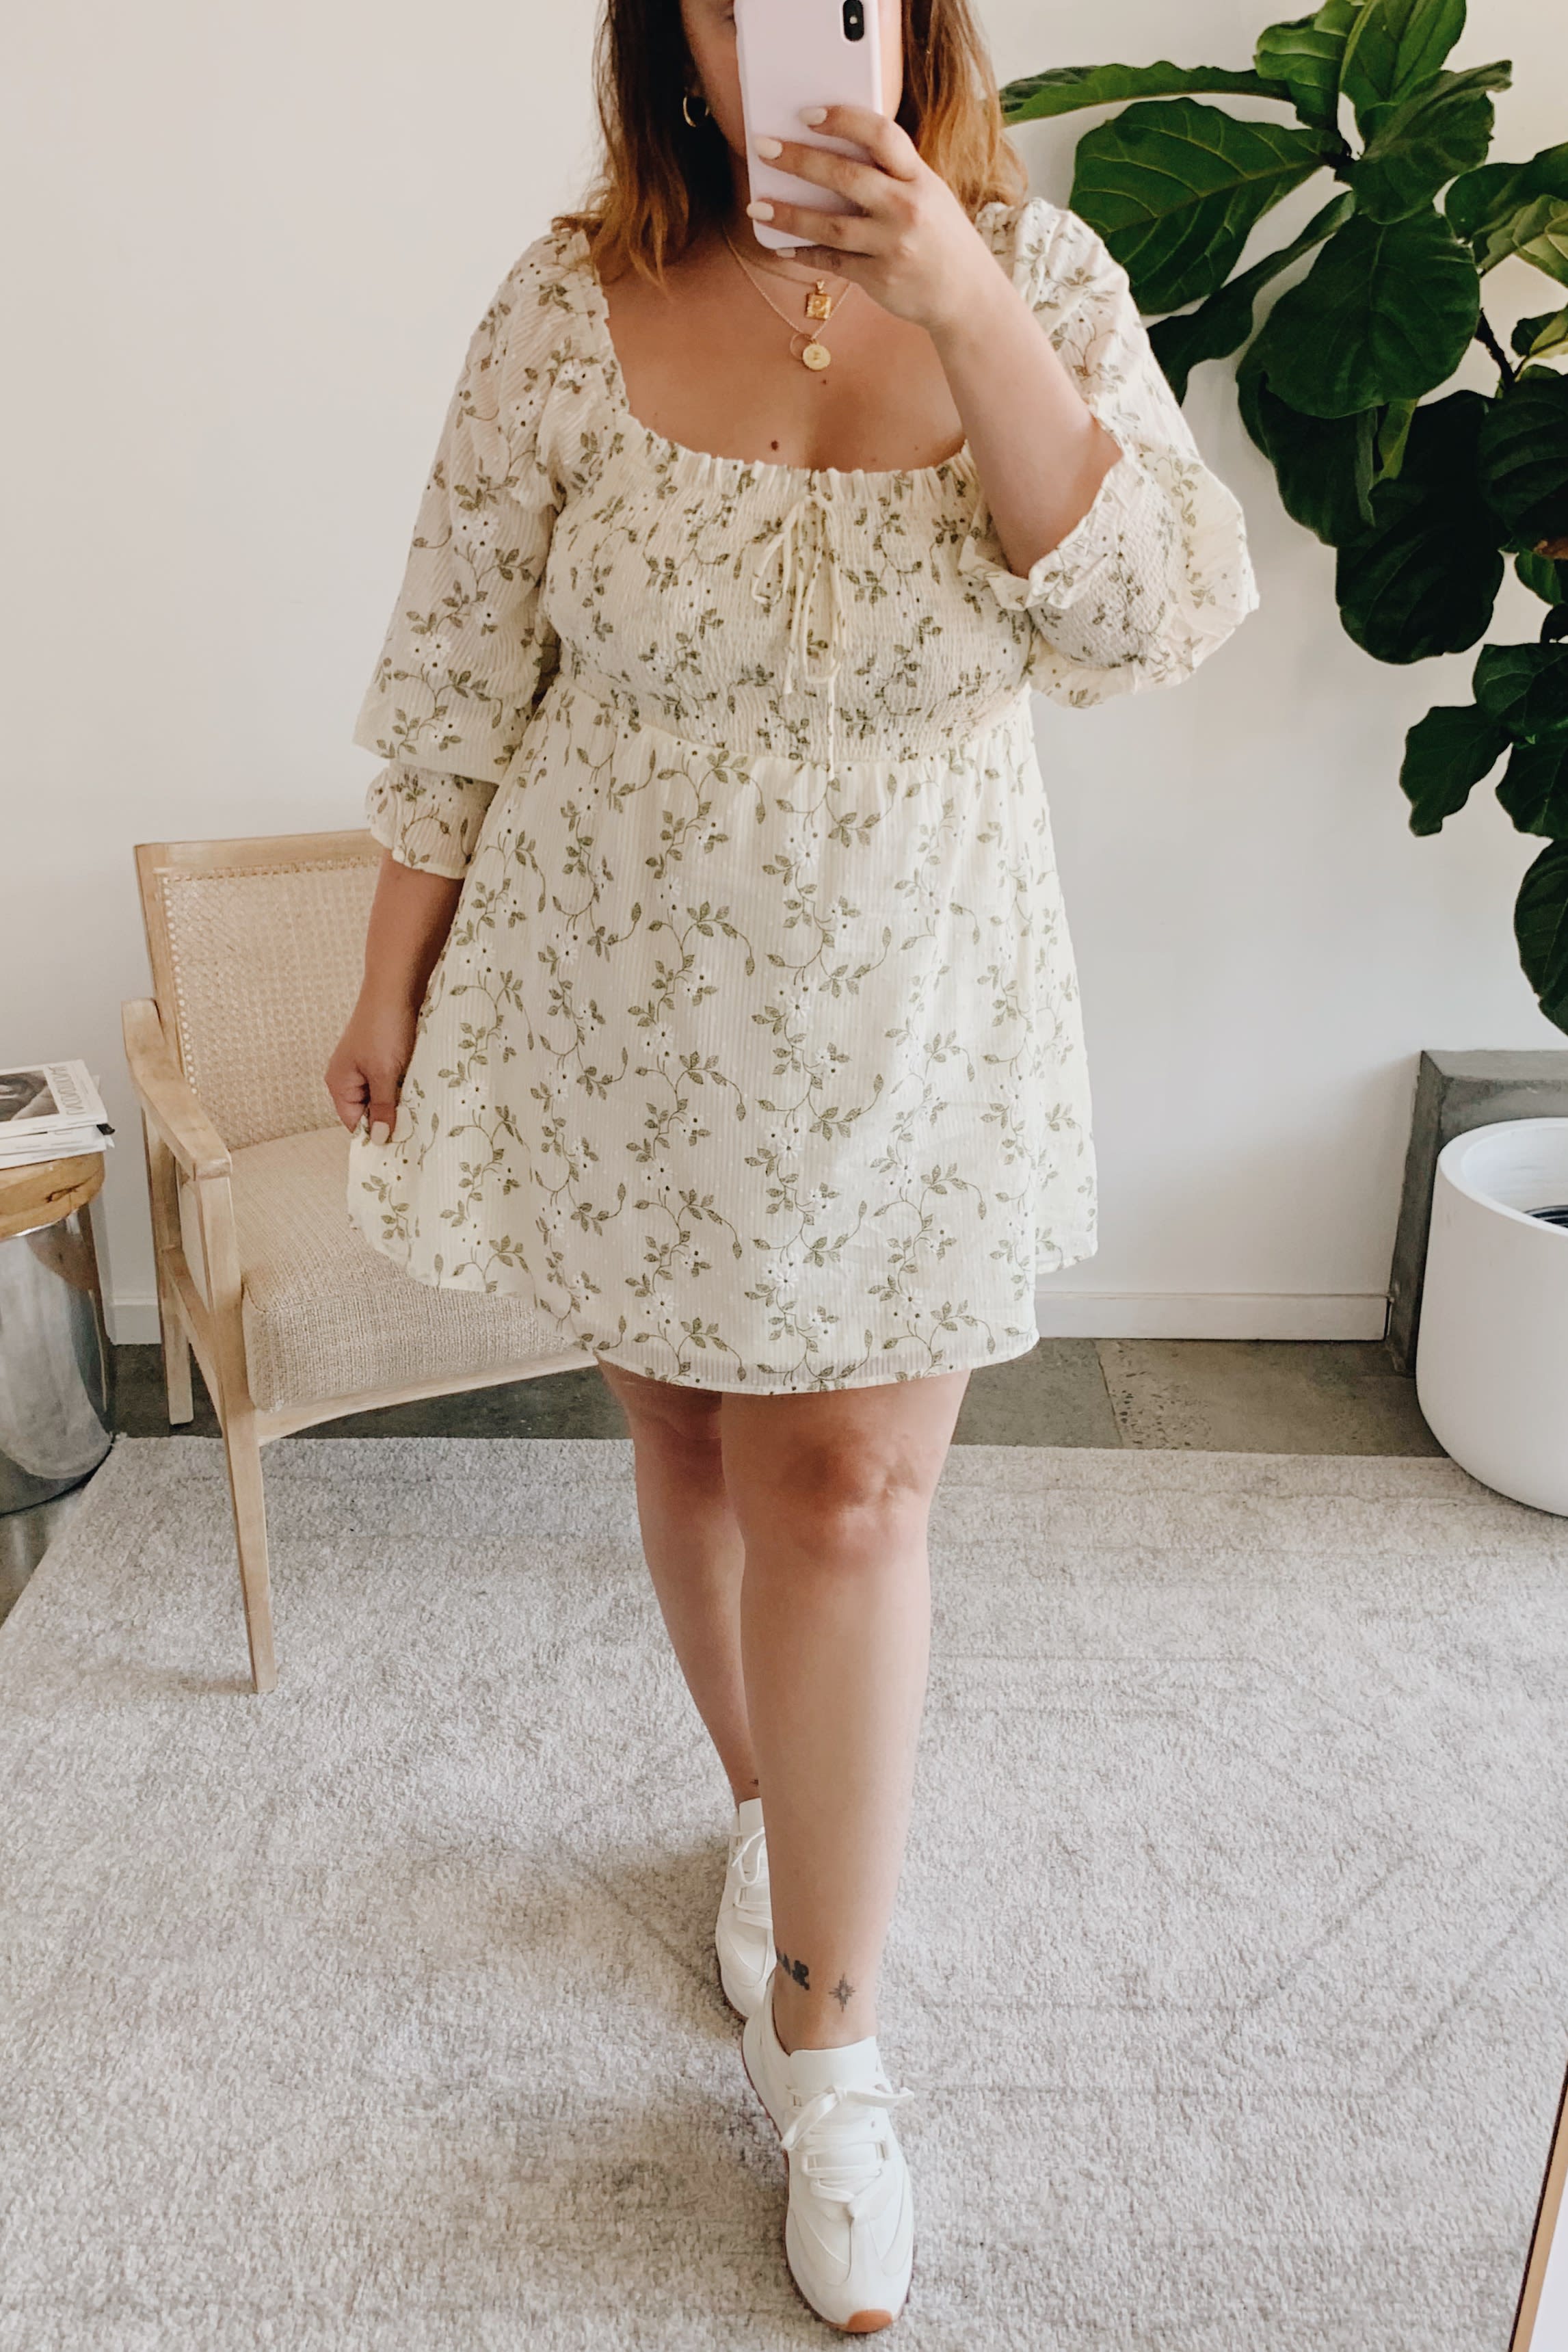 How To Wear Dresses And Sneakers: 11 Cute Outfit Ideas  Fashion  Blog